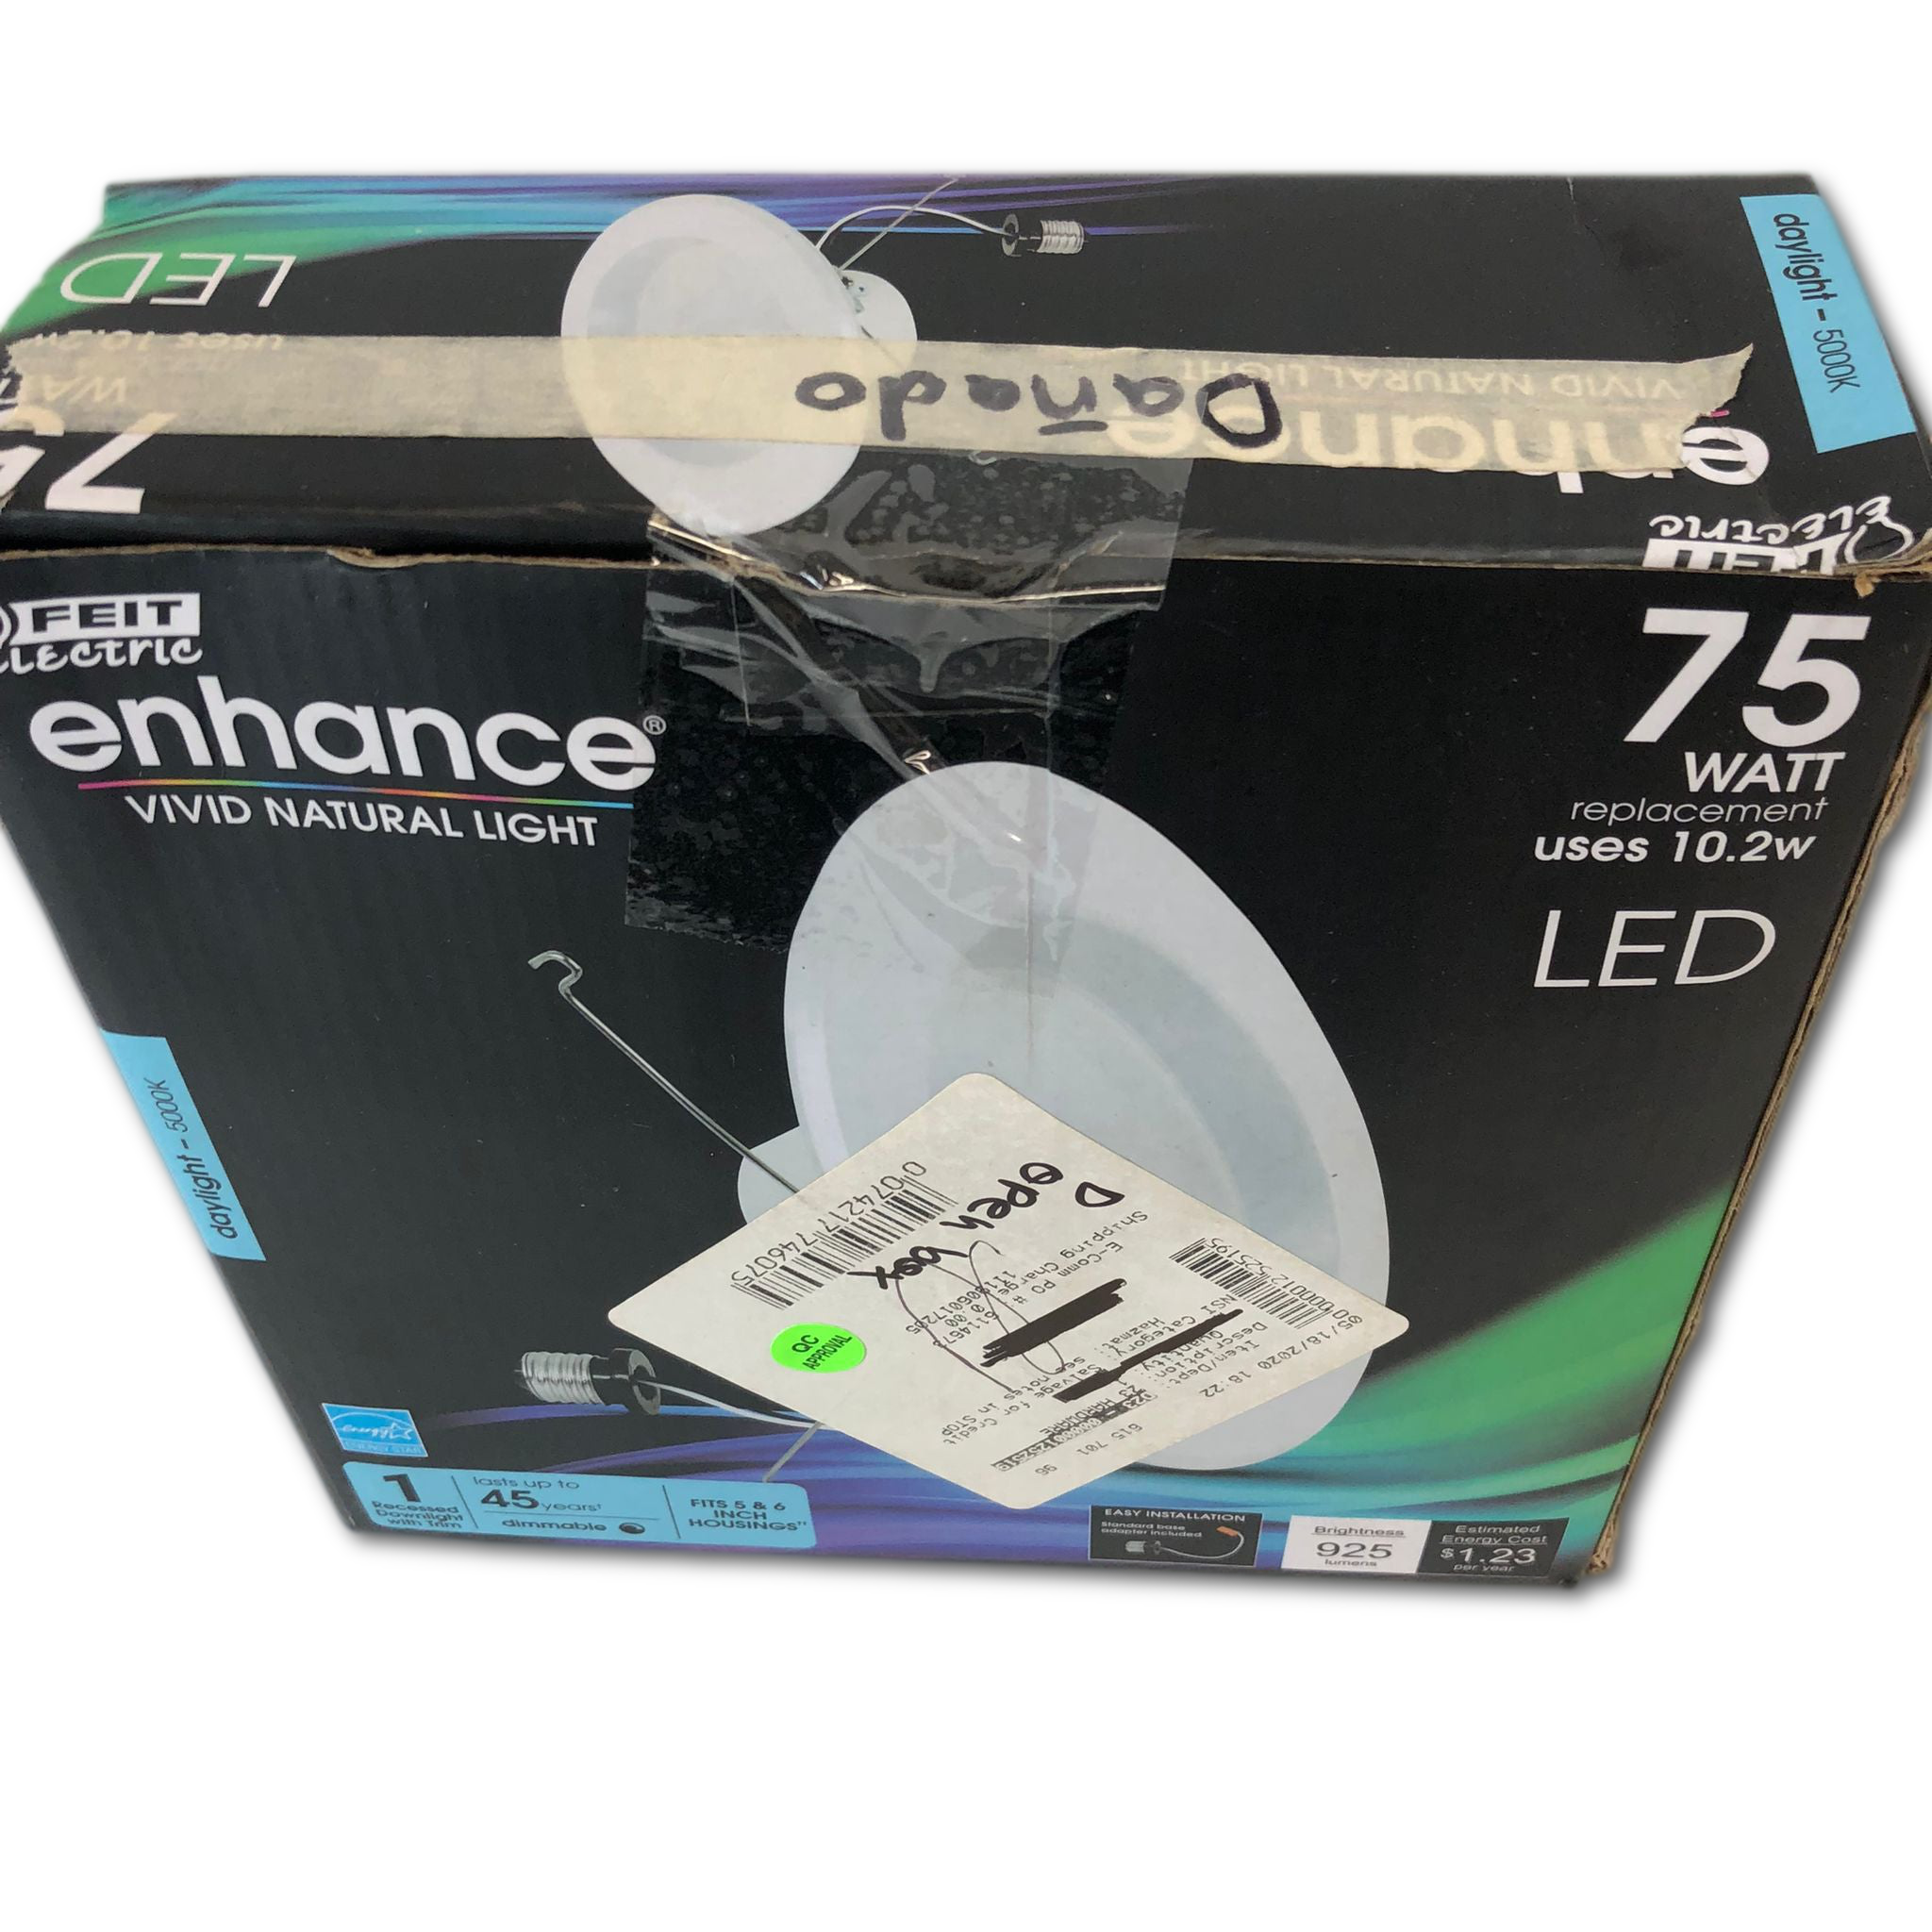 As is Feit Electric LED 5"- 6" Retrofit, 6-pack